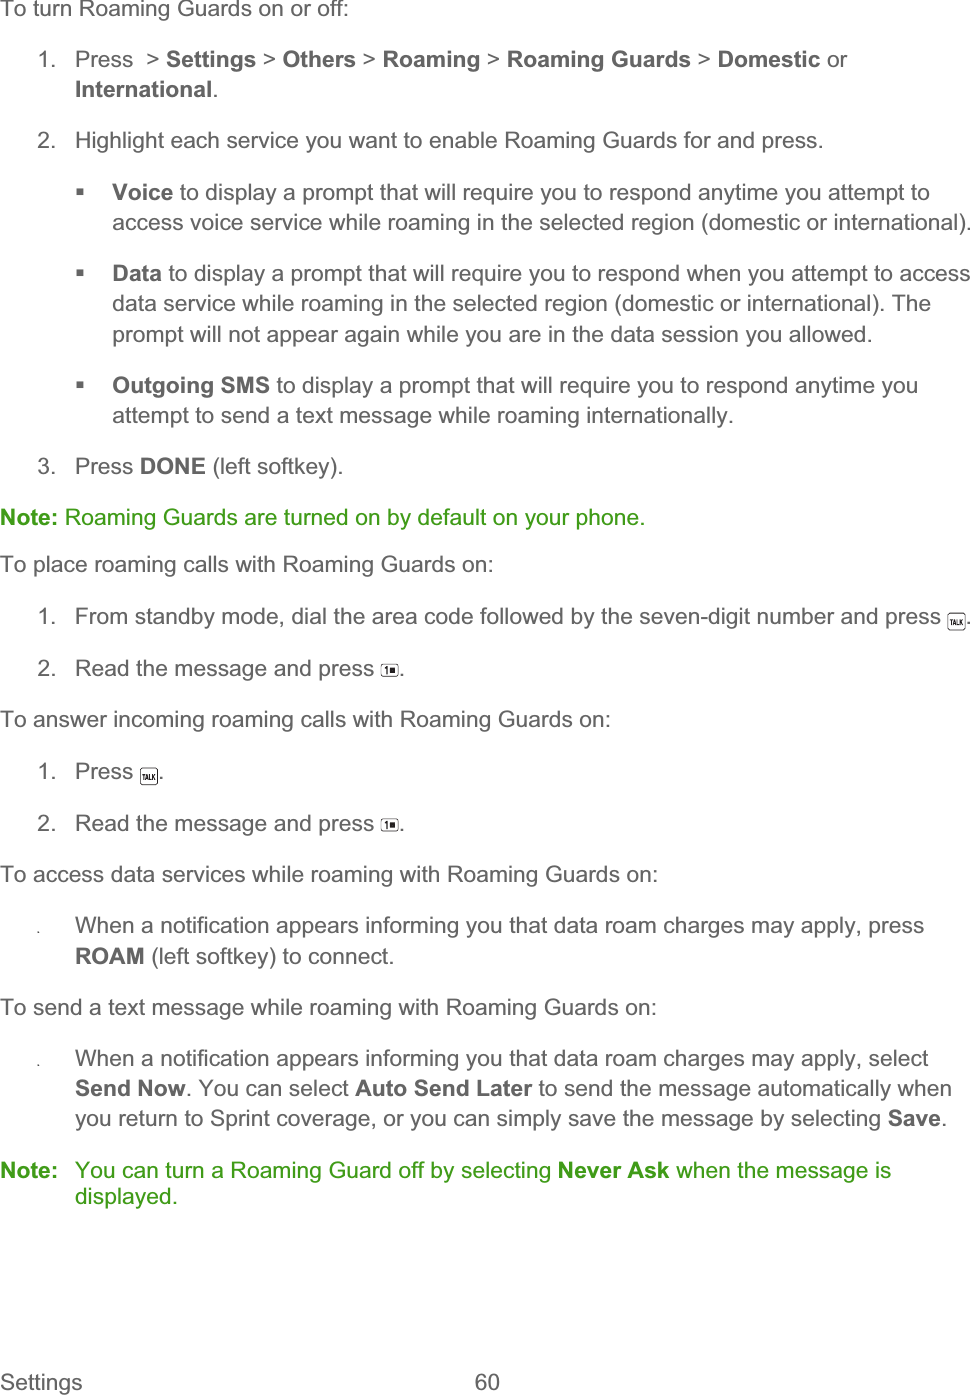 Settings 60   To turn Roaming Guards on or off: 1. Press &gt; Settings &gt; Others &gt; Roaming &gt; Roaming Guards &gt; Domestic orInternational.2.  Highlight each service you want to enable Roaming Guards for and press. Voice to display a prompt that will require you to respond anytime you attempt to access voice service while roaming in the selected region (domestic or international). Data to display a prompt that will require you to respond when you attempt to access data service while roaming in the selected region (domestic or international). The prompt will not appear again while you are in the data session you allowed. Outgoing SMS to display a prompt that will require you to respond anytime you attempt to send a text message while roaming internationally. 3. Press DONE (left softkey). Note: Roaming Guards are turned on by default on your phone. To place roaming calls with Roaming Guards on: 1.  From standby mode, dial the area code followed by the seven-digit number and press  .2.  Read the message and press  .To answer incoming roaming calls with Roaming Guards on: 1. Press  .2.  Read the message and press  .To access data services while roaming with Roaming Guards on: ʇWhen a notification appears informing you that data roam charges may apply, press ROAM (left softkey) to connect. To send a text message while roaming with Roaming Guards on: ʇWhen a notification appears informing you that data roam charges may apply, select Send Now. You can select Auto Send Later to send the message automatically when you return to Sprint coverage, or you can simply save the message by selecting Save.Note:  You can turn a Roaming Guard off by selecting Never Ask when the message is displayed.